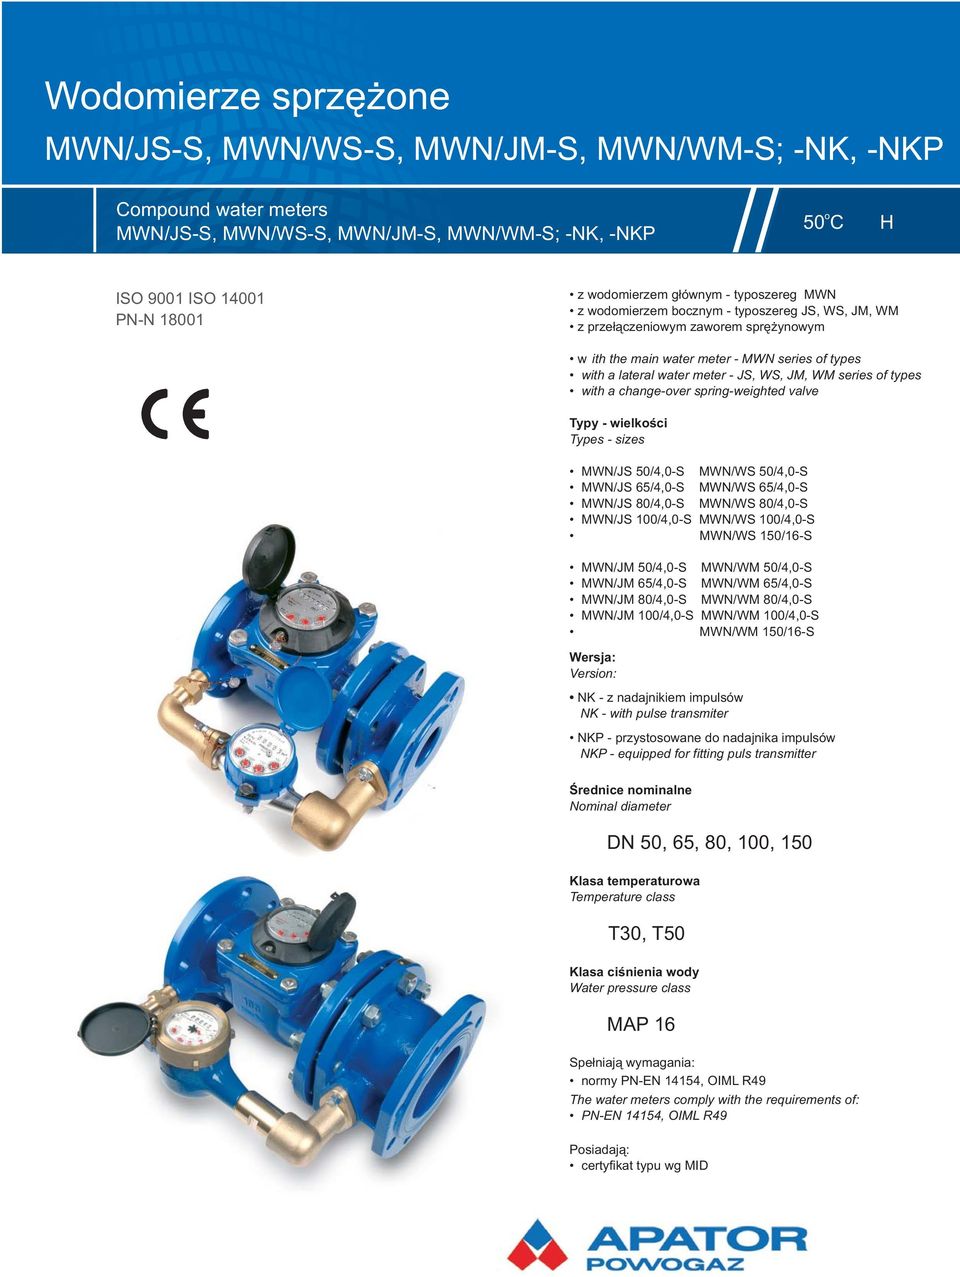 a change-over spring-weighted valve Typy - wielkości Types - sizes MWN/JS 50/4,0-S 50/4,0-S MWN/JS 65/ 4,0-S MWN/ WS 65/ 4,0-S MWN/JS 80/ 4,0-S 80/ 4,0-S MWN/JS 100/ 4,0-S 100/ 4,0-S 150/16-S MWN/JM